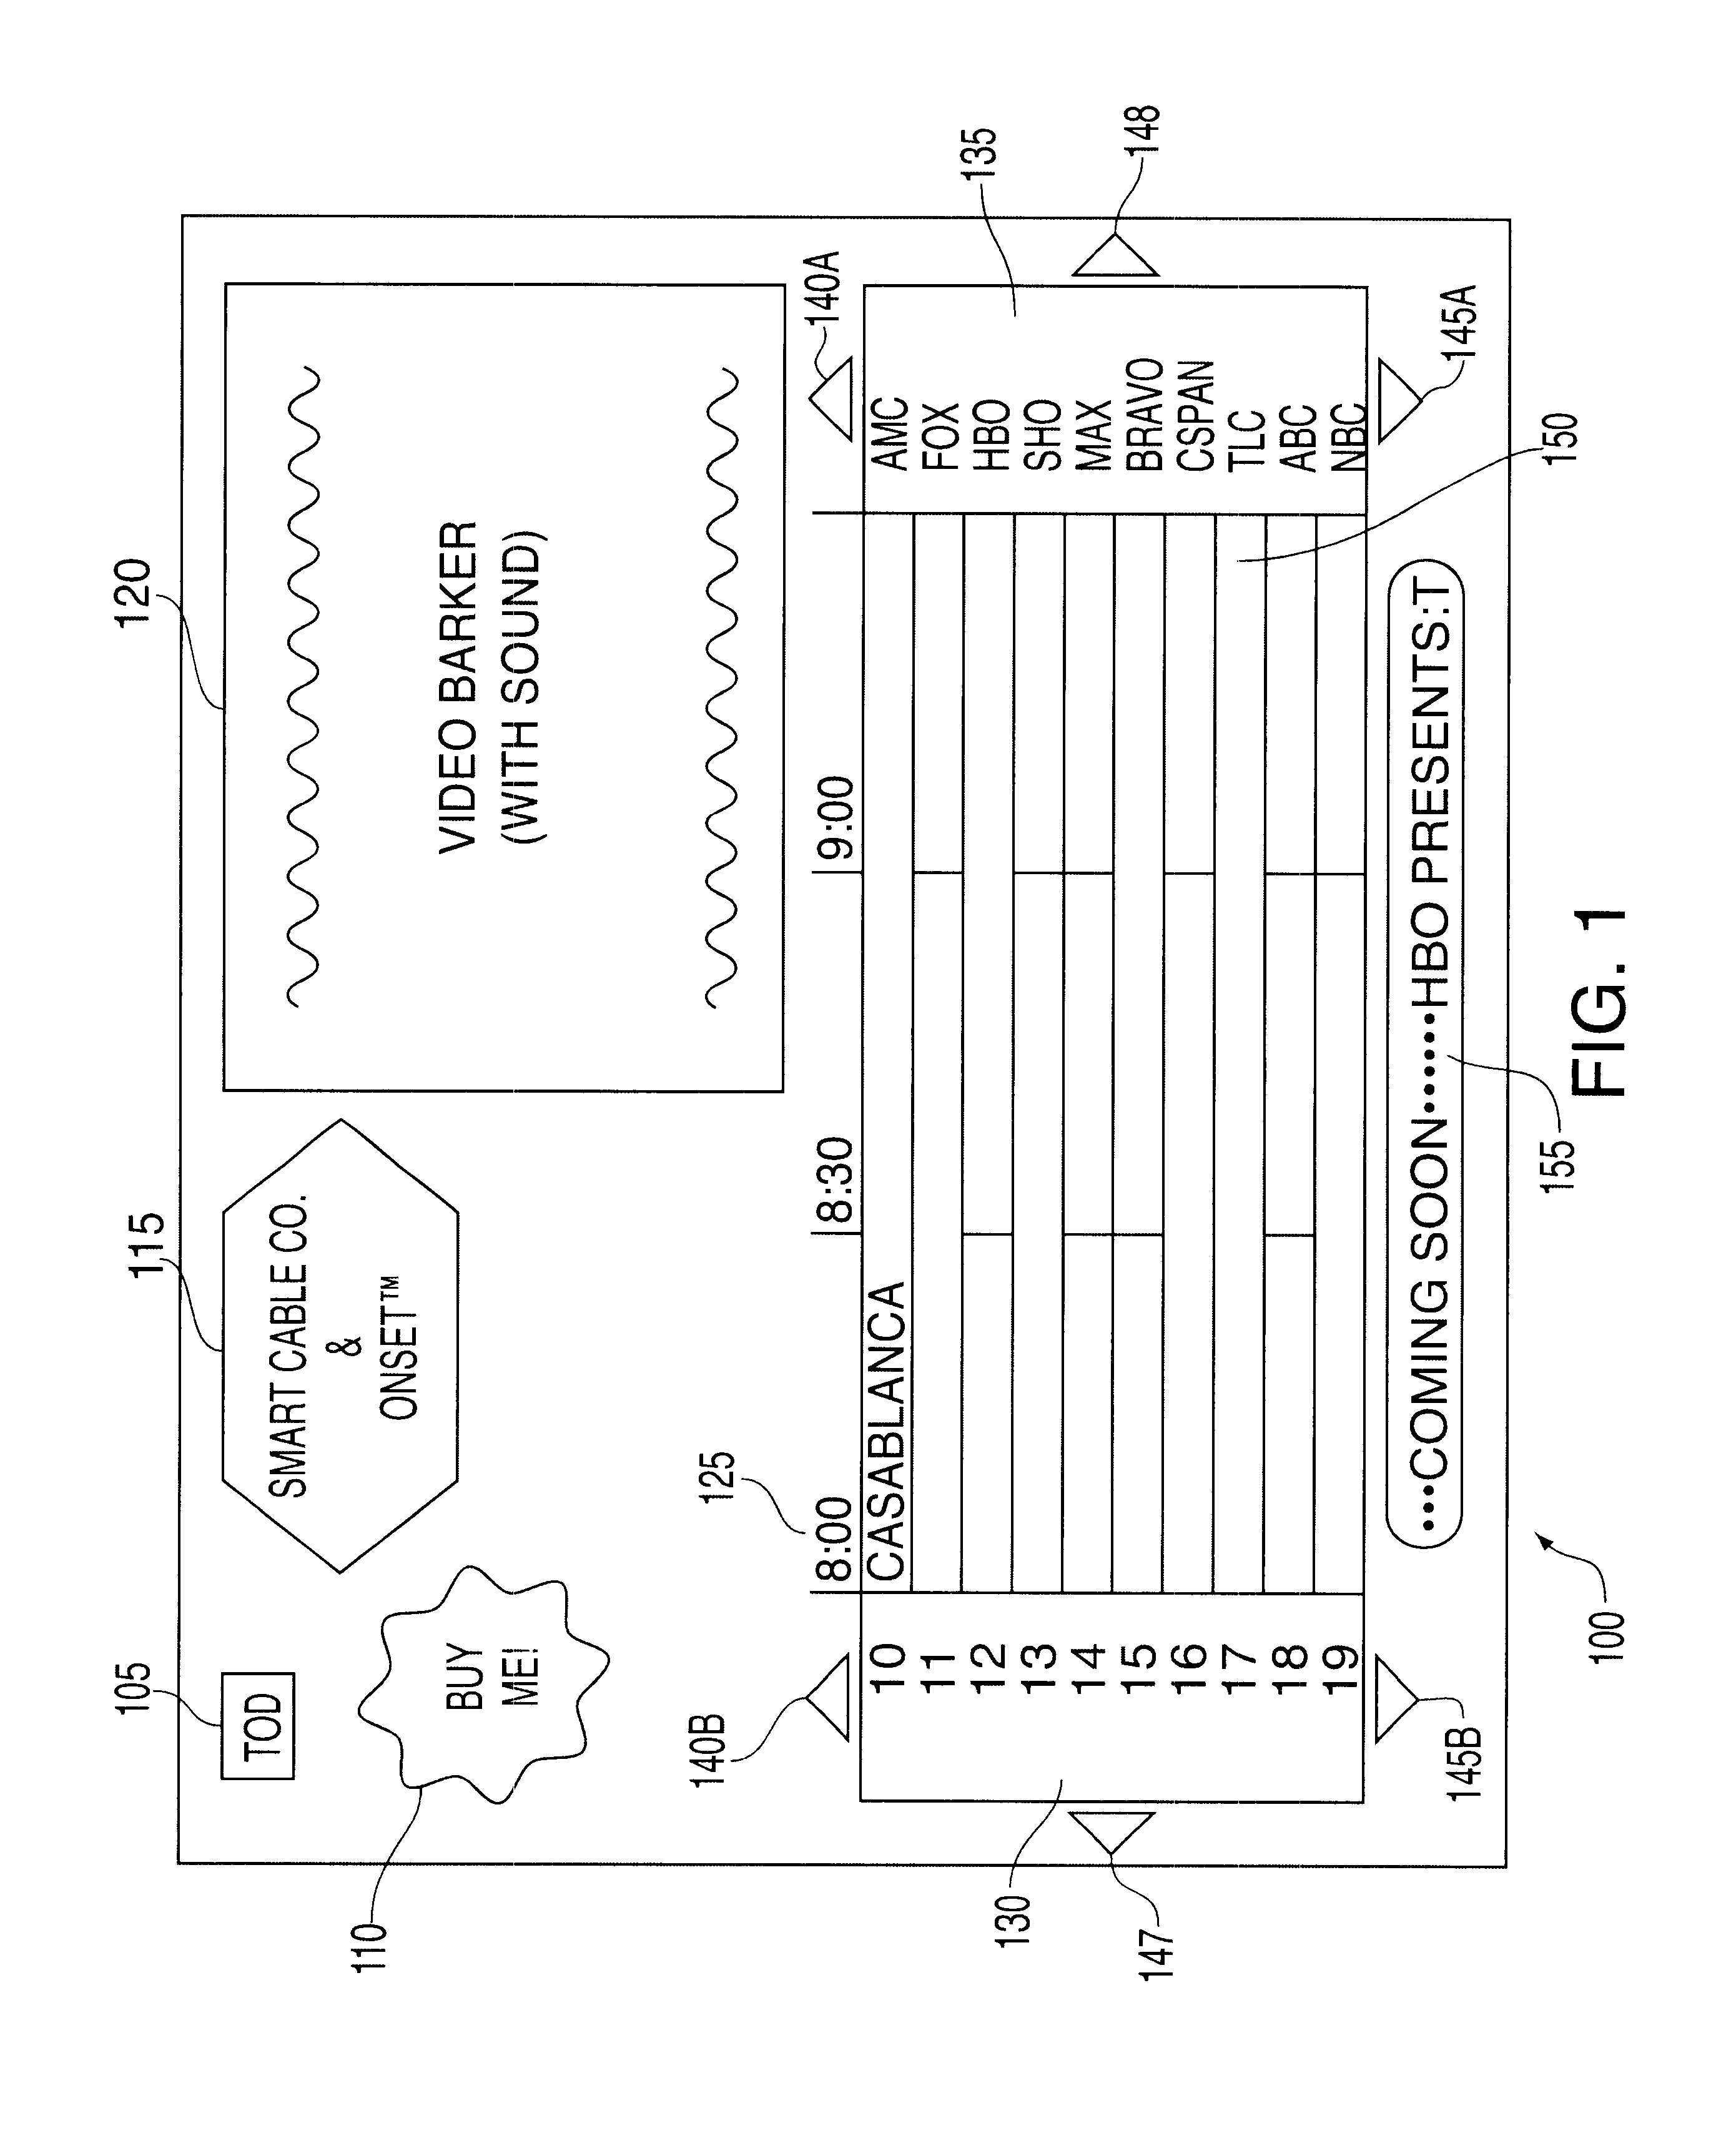 Data structure and methods for providing an interactive program guide